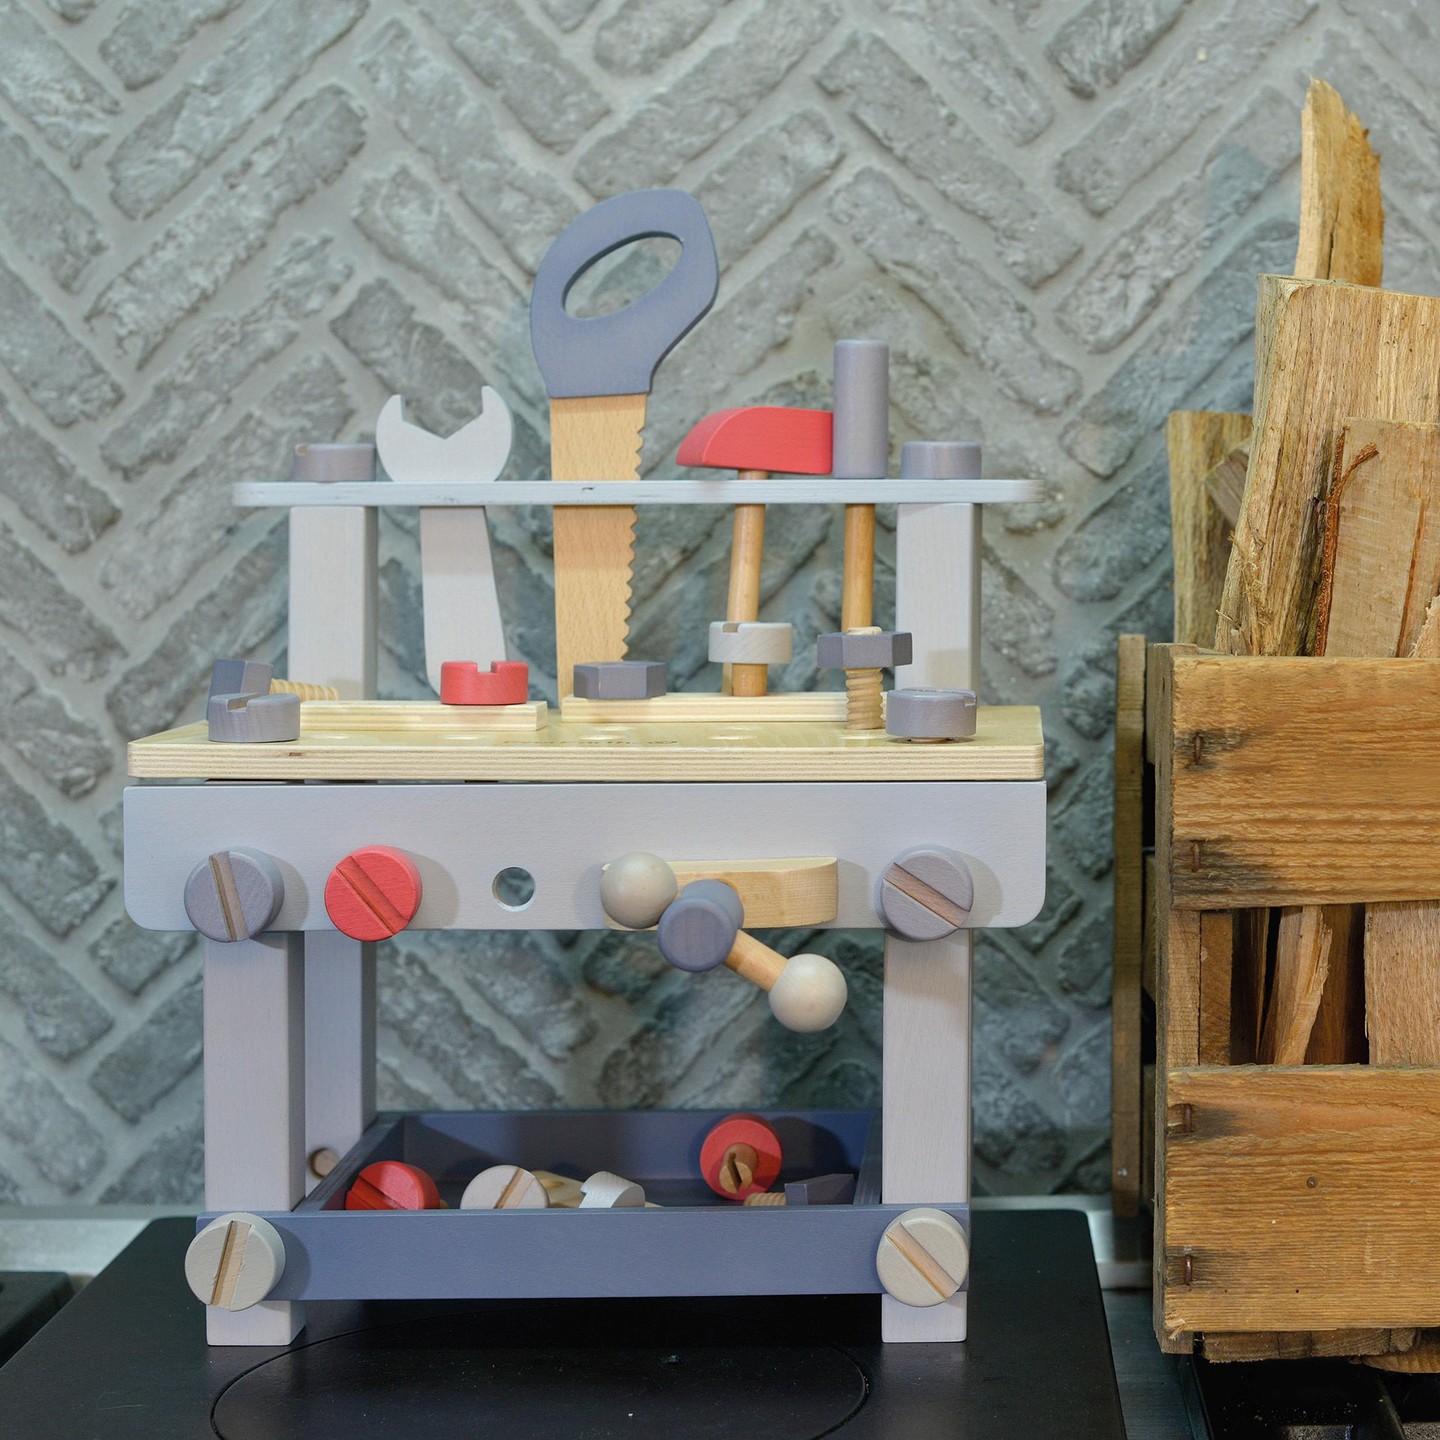 Large Workbench from the EverEarth Lifestyle wooden toy range and distributed by Australian Toy sales.
#carpenter #play #fun #woodentoys #ecofriendly #ats #wood #building #toy